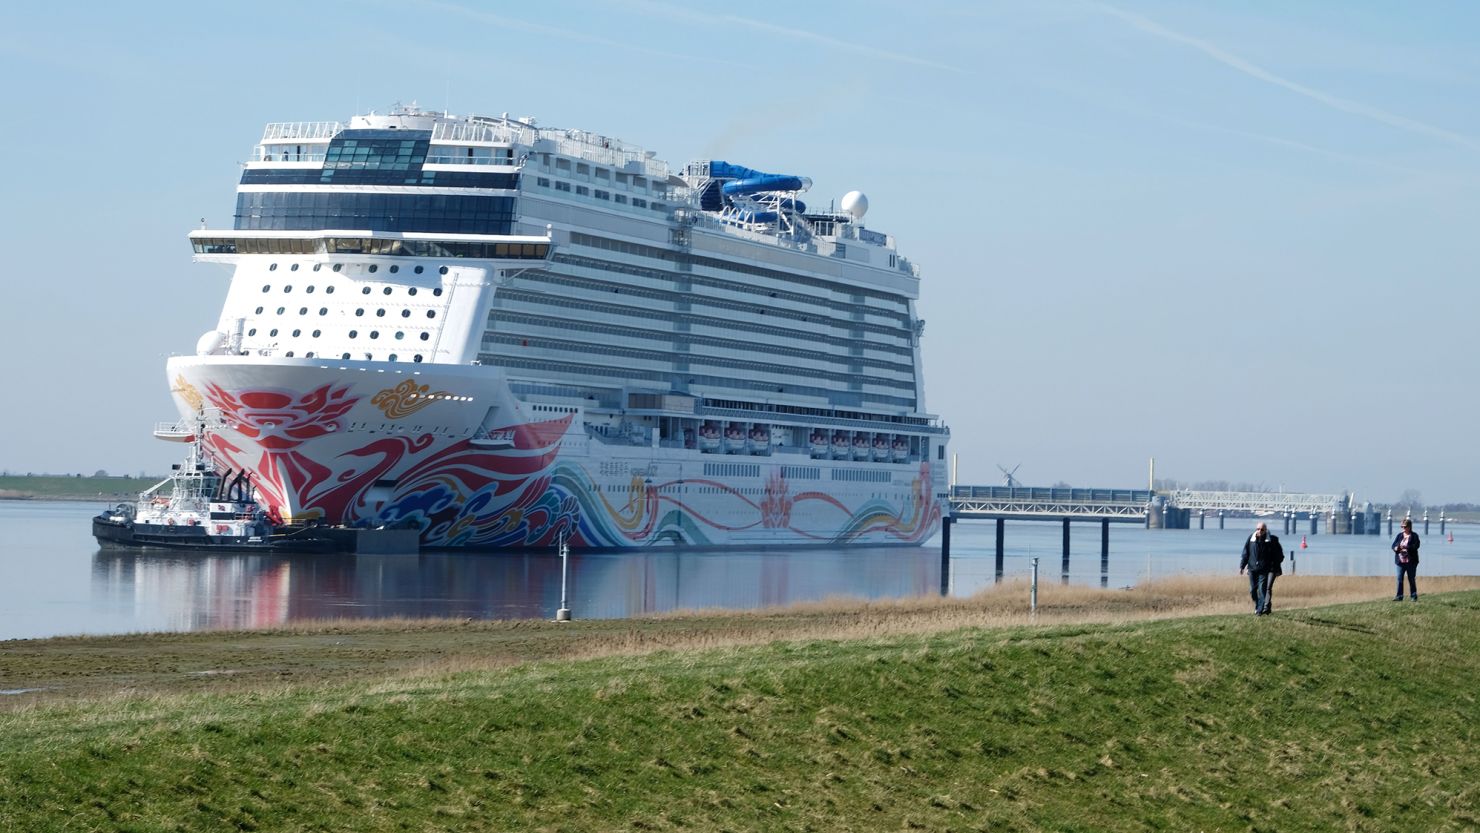 Spectators watch as the Norwegian Joy cruise ship makes its way down the Ems River near Emden in northern Germany on March 27, 2017.